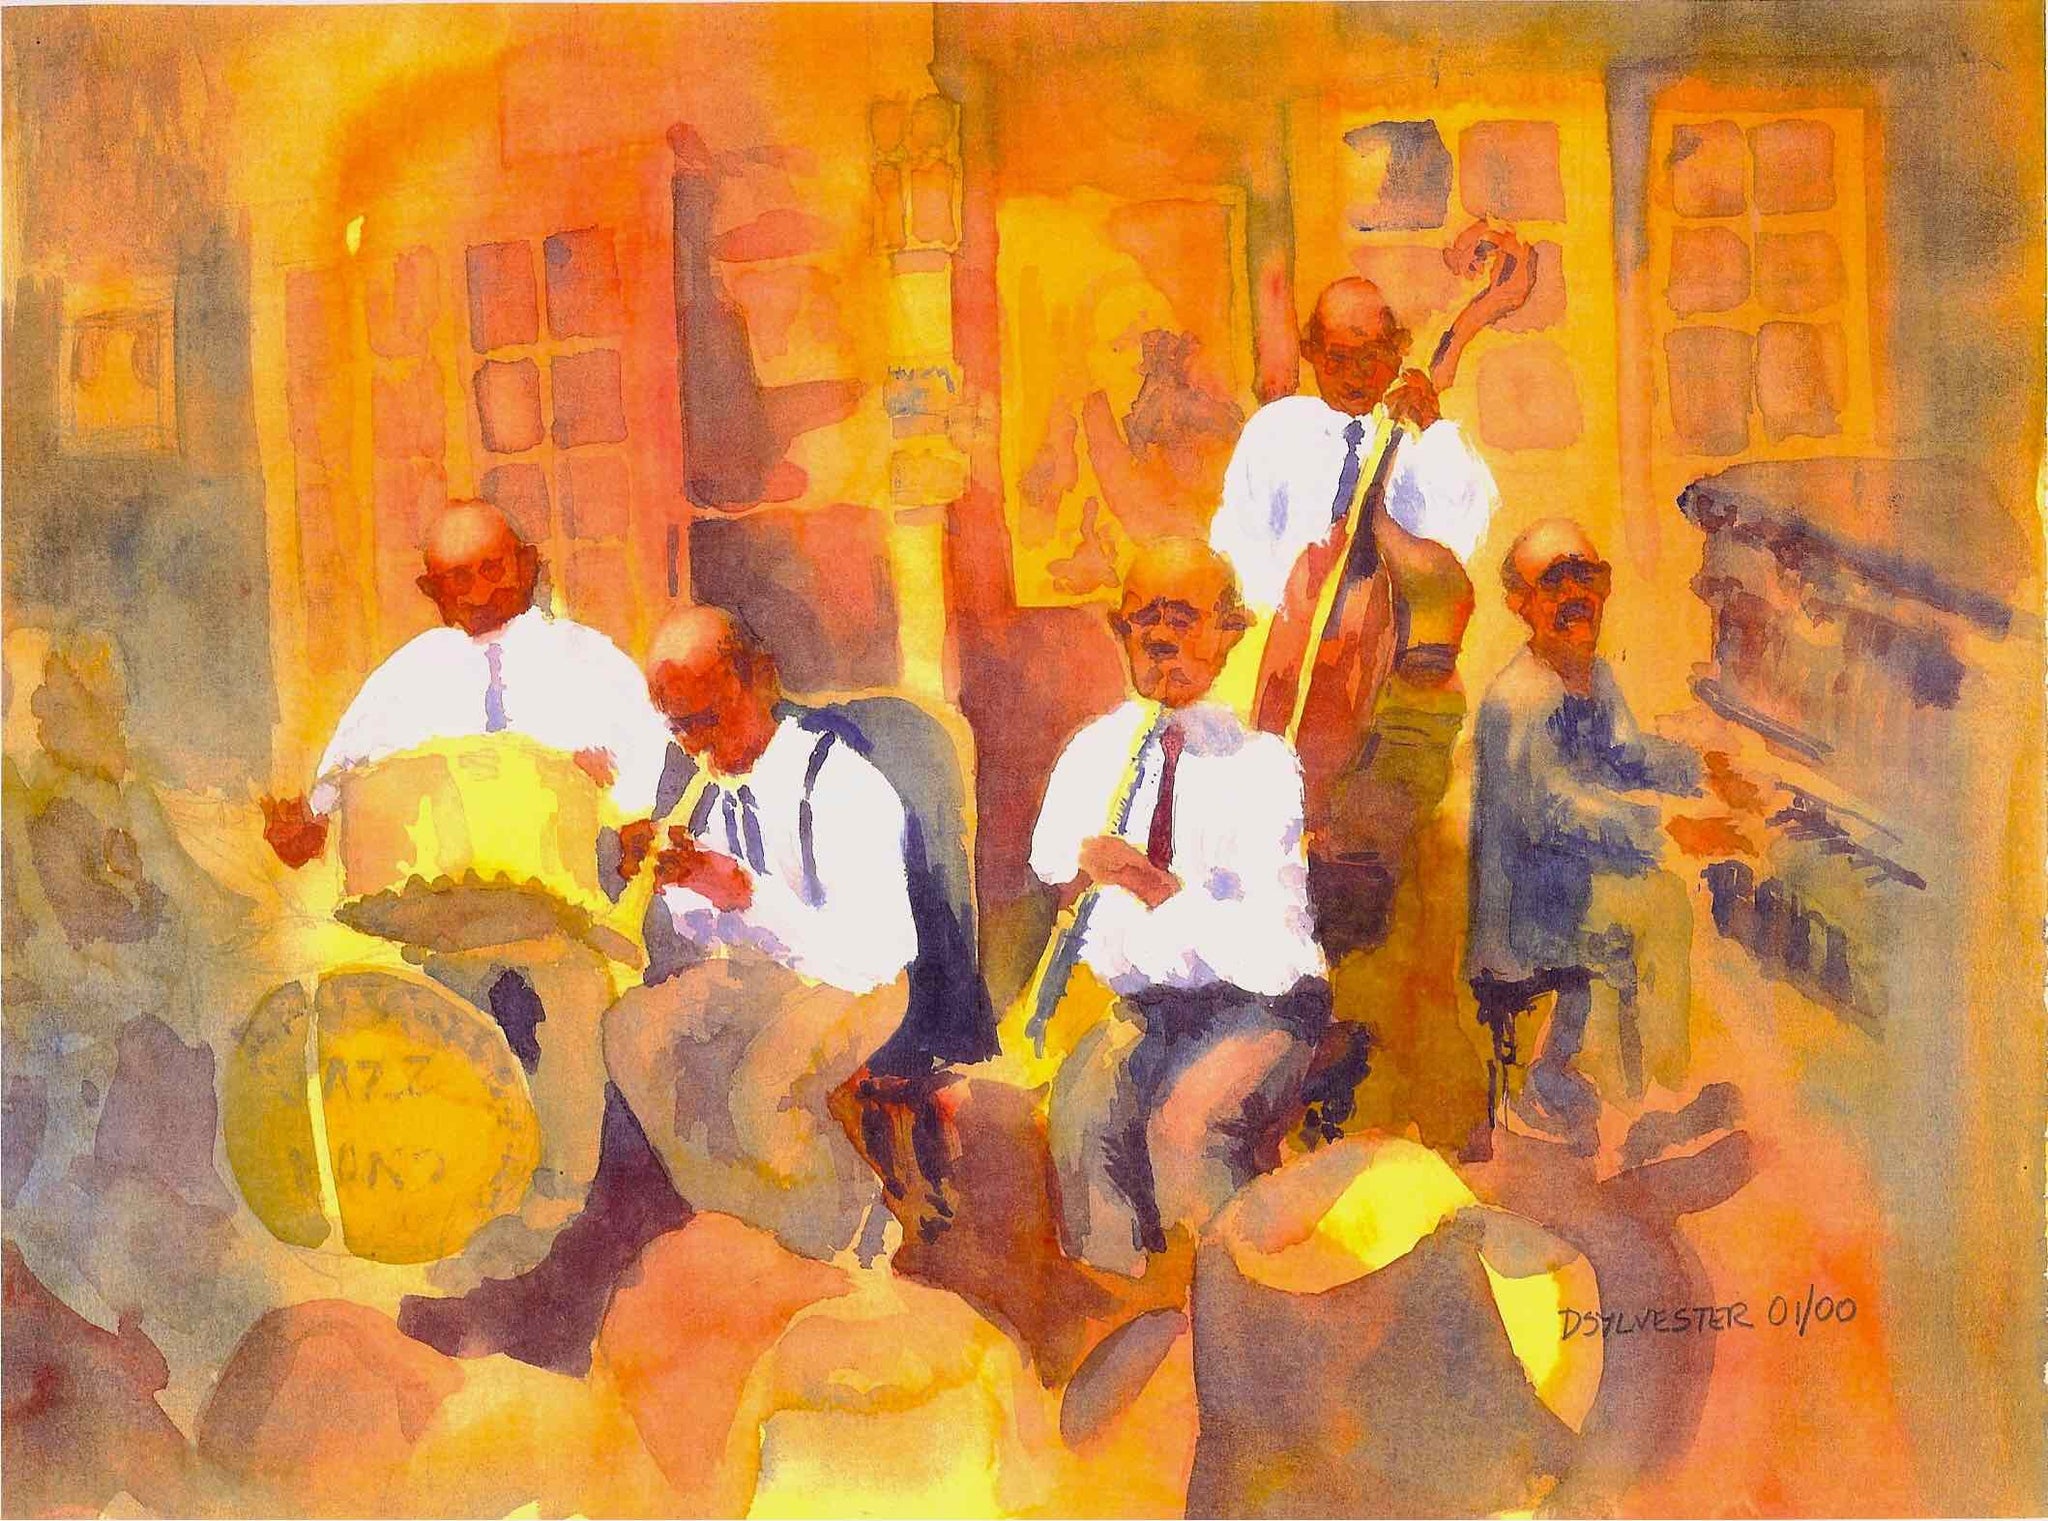 NEW ORLEANS - JAZZ BAND IN PRESERVATION HALL